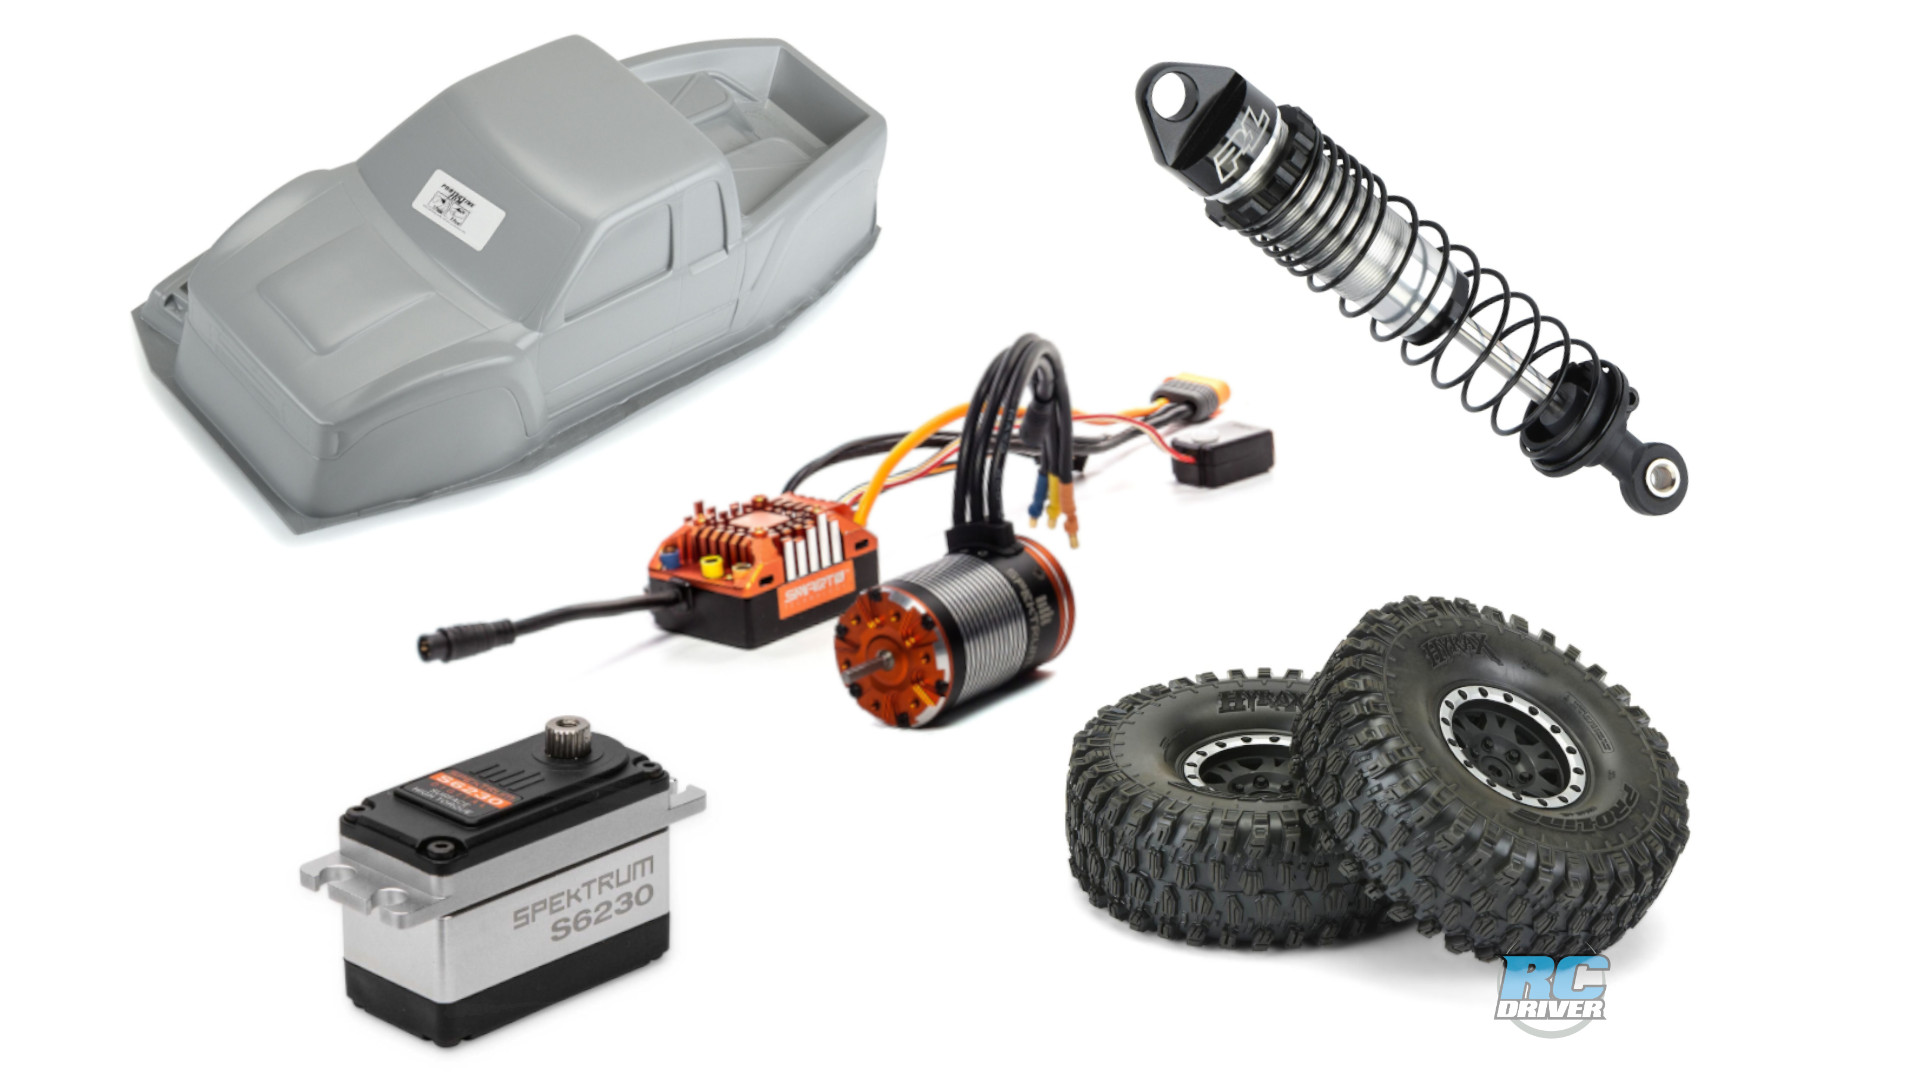 The first 5 essential upgrades for RTR crawlers